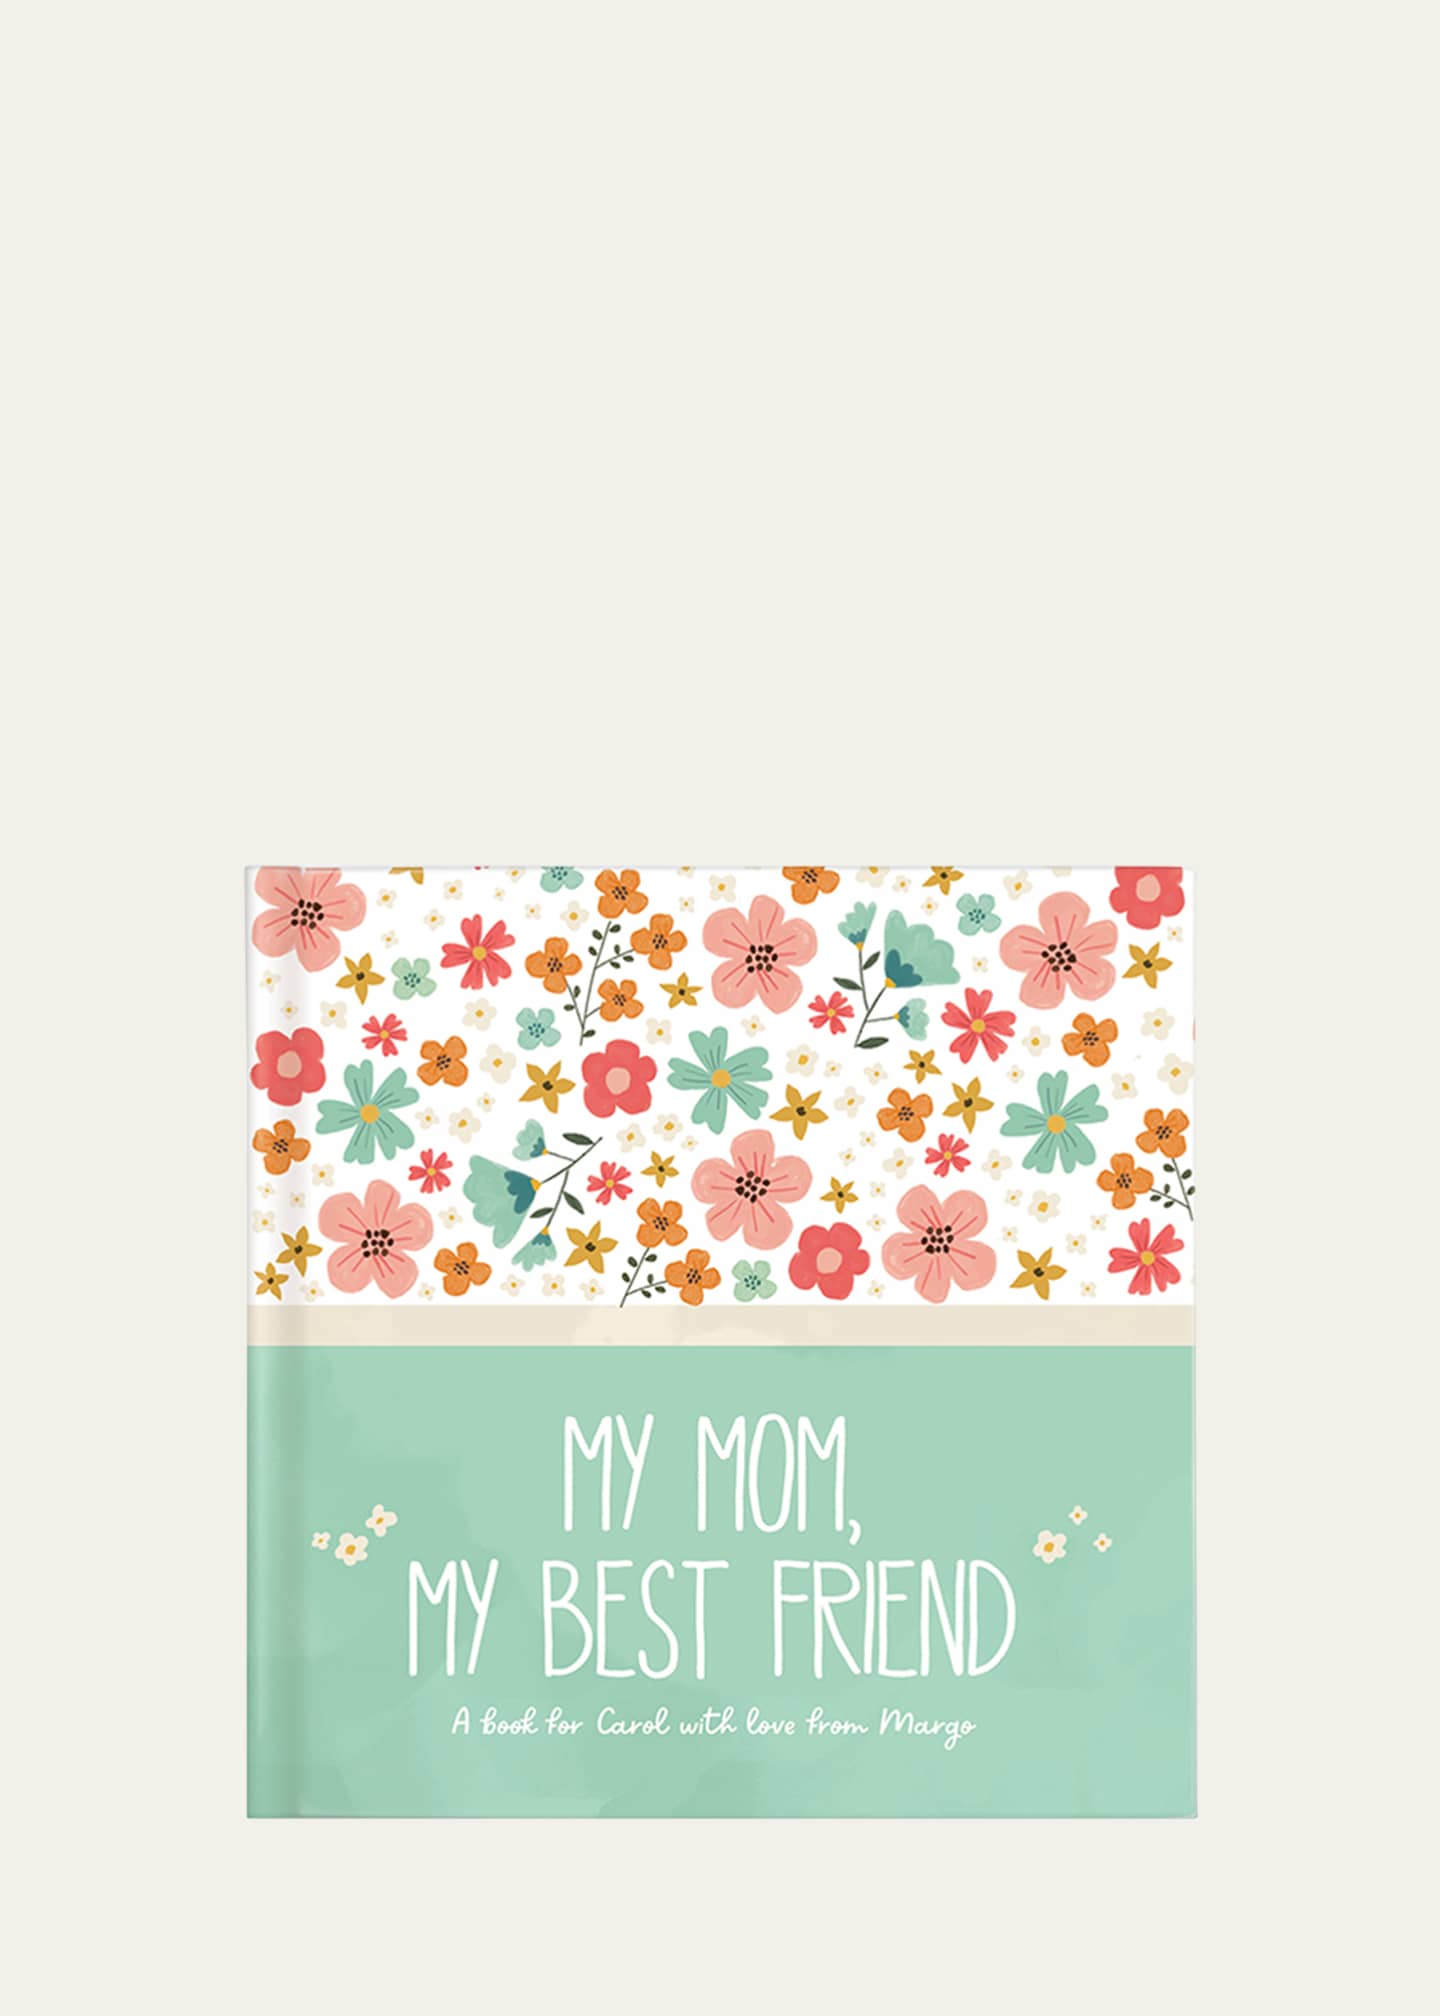 I Love Mommy This Much, Personalized Book for Moms